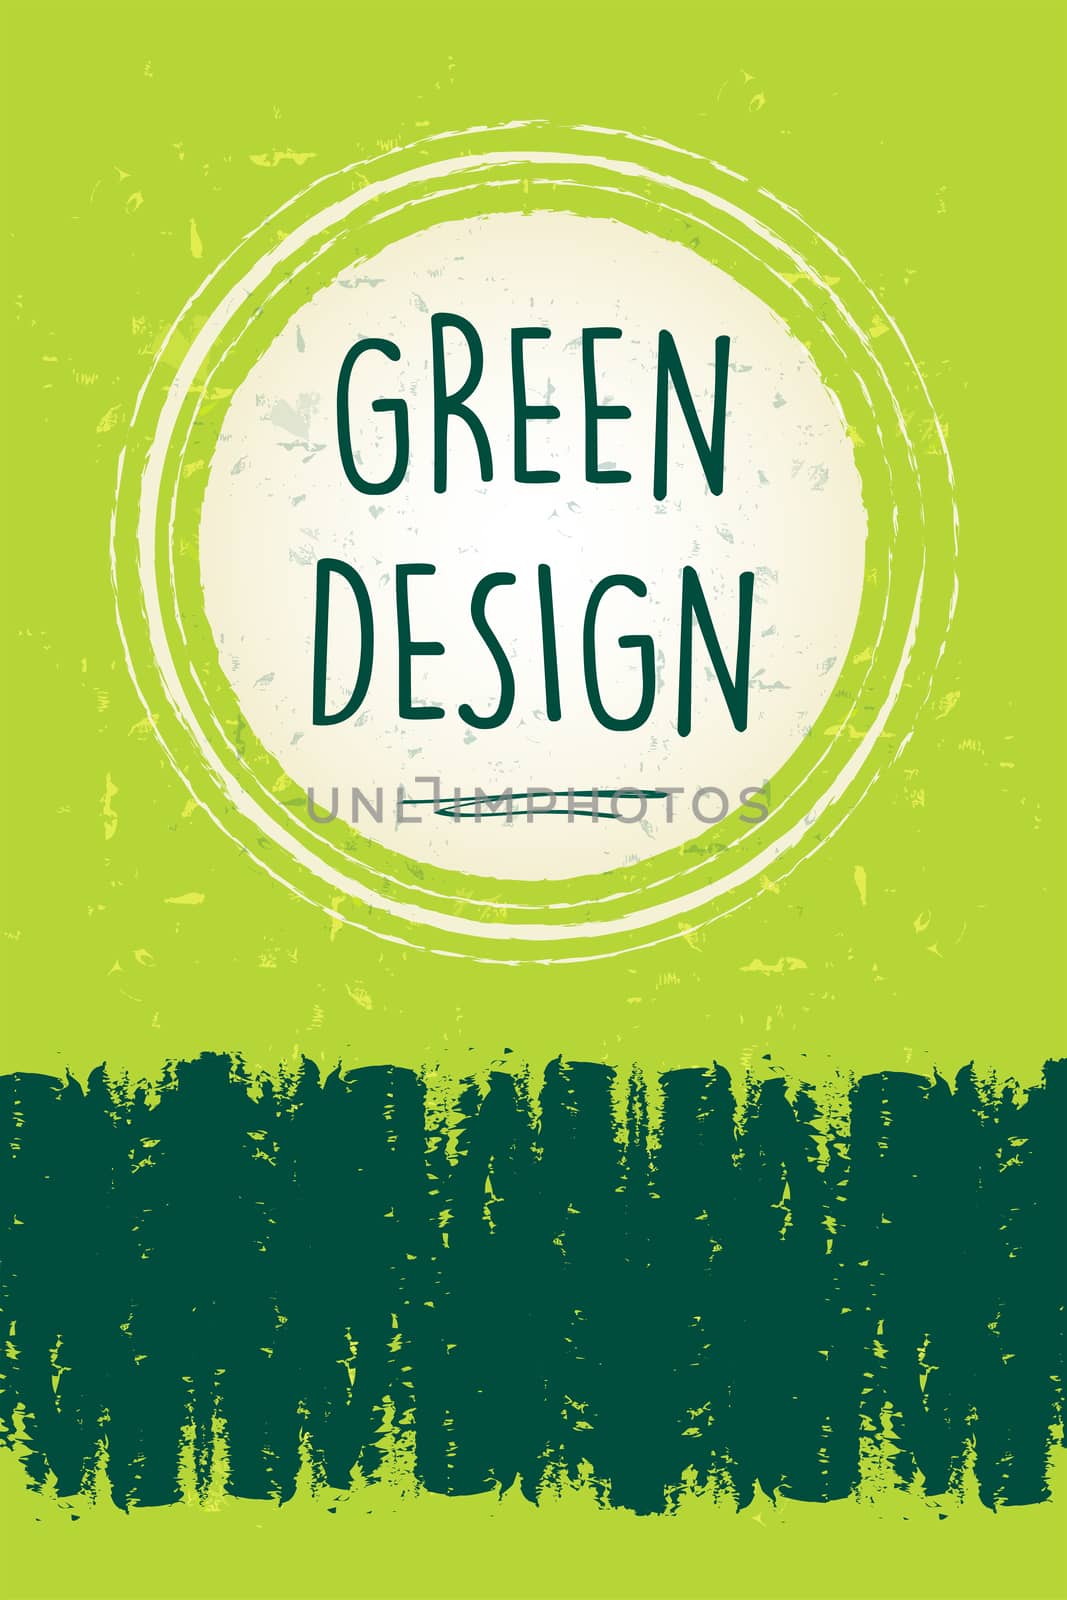 green design text in circle with rings over green old paper background